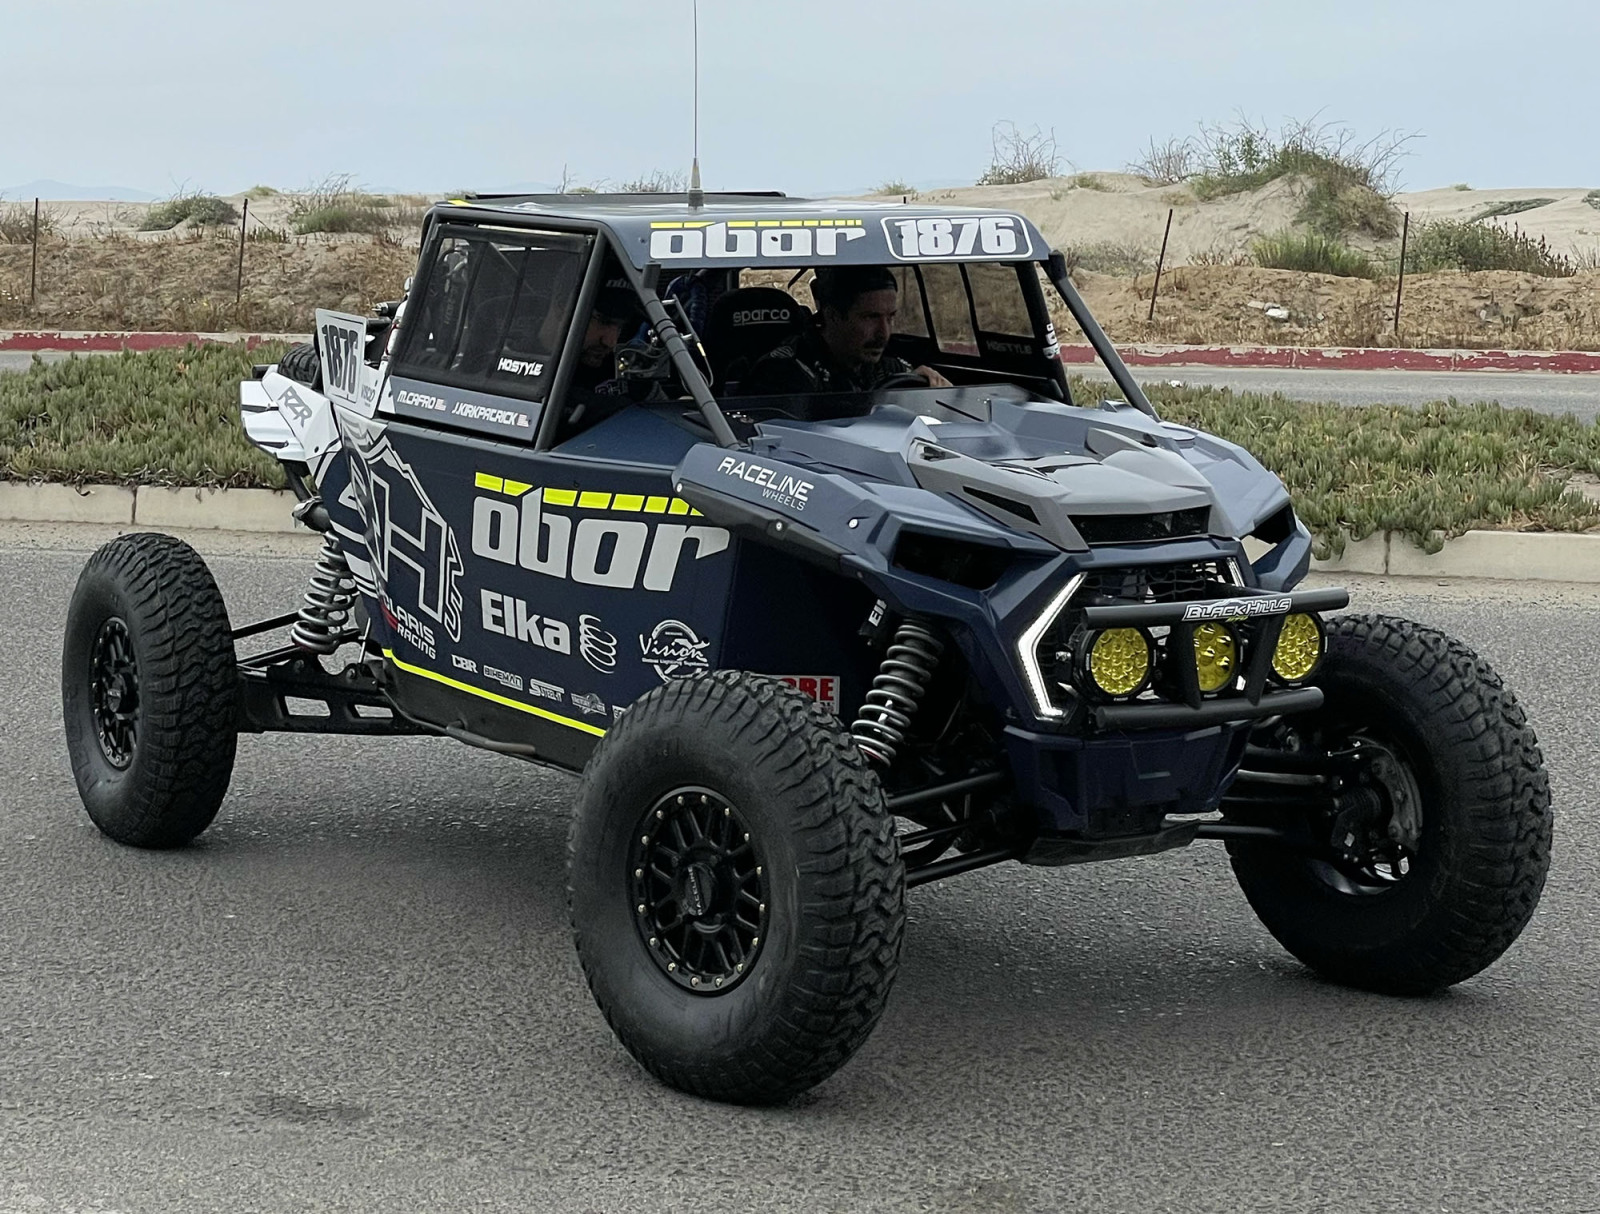 For Sale: Another SOLD - 2022 Score Championship winning RZR, 2020 Polaris Turbo S - photo0